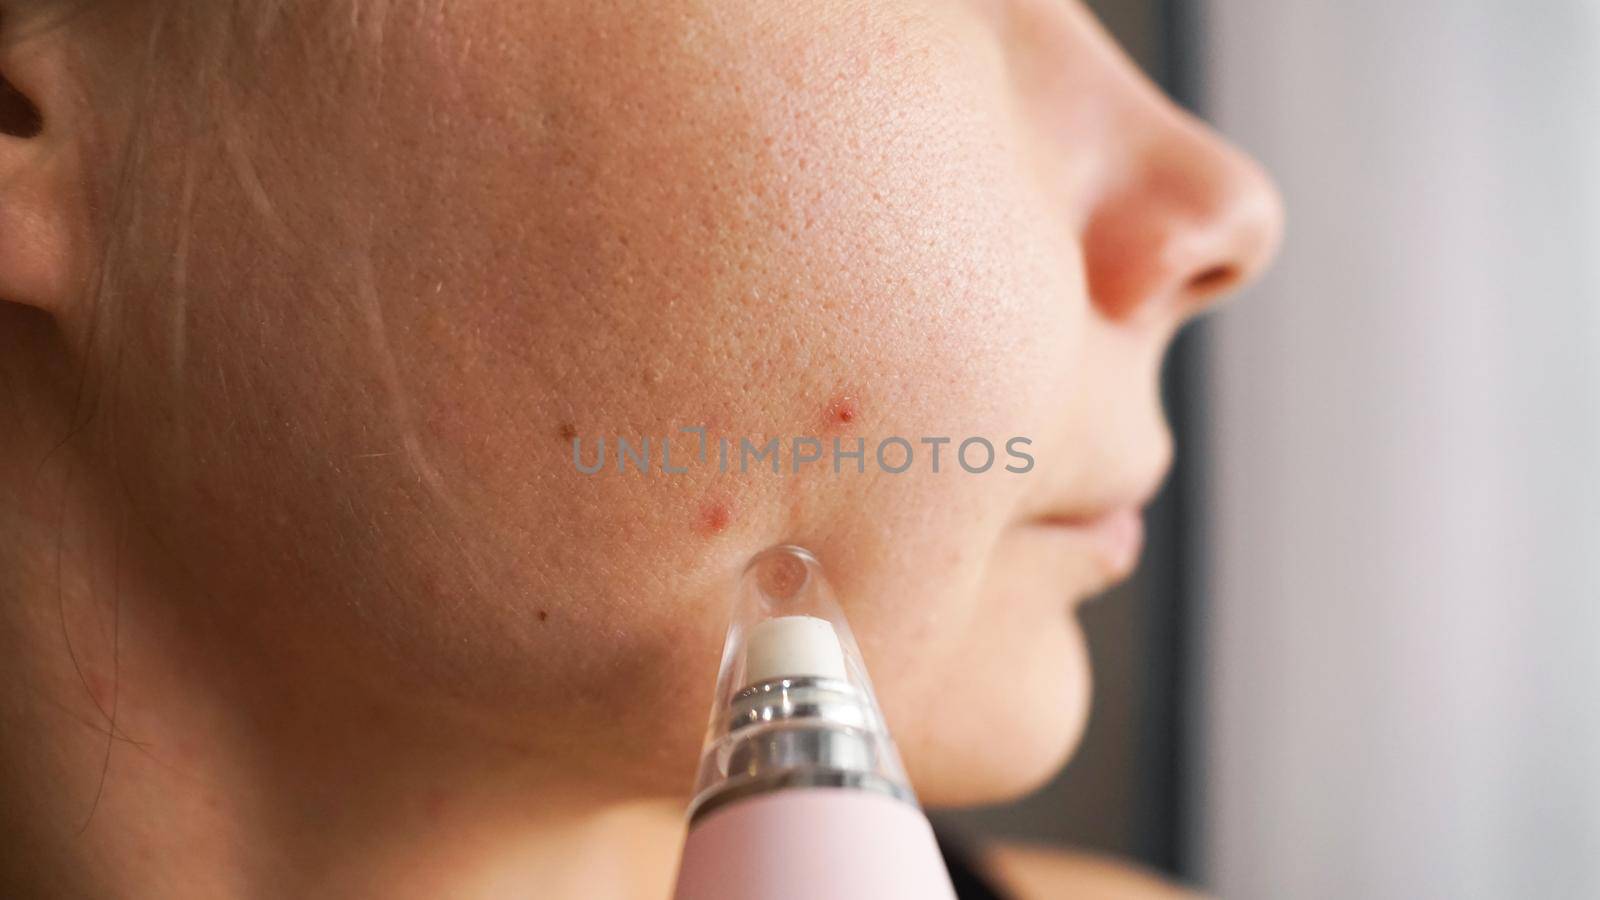 Vacuum device for removing blackheads and acne from the face. Home cosmetology concept